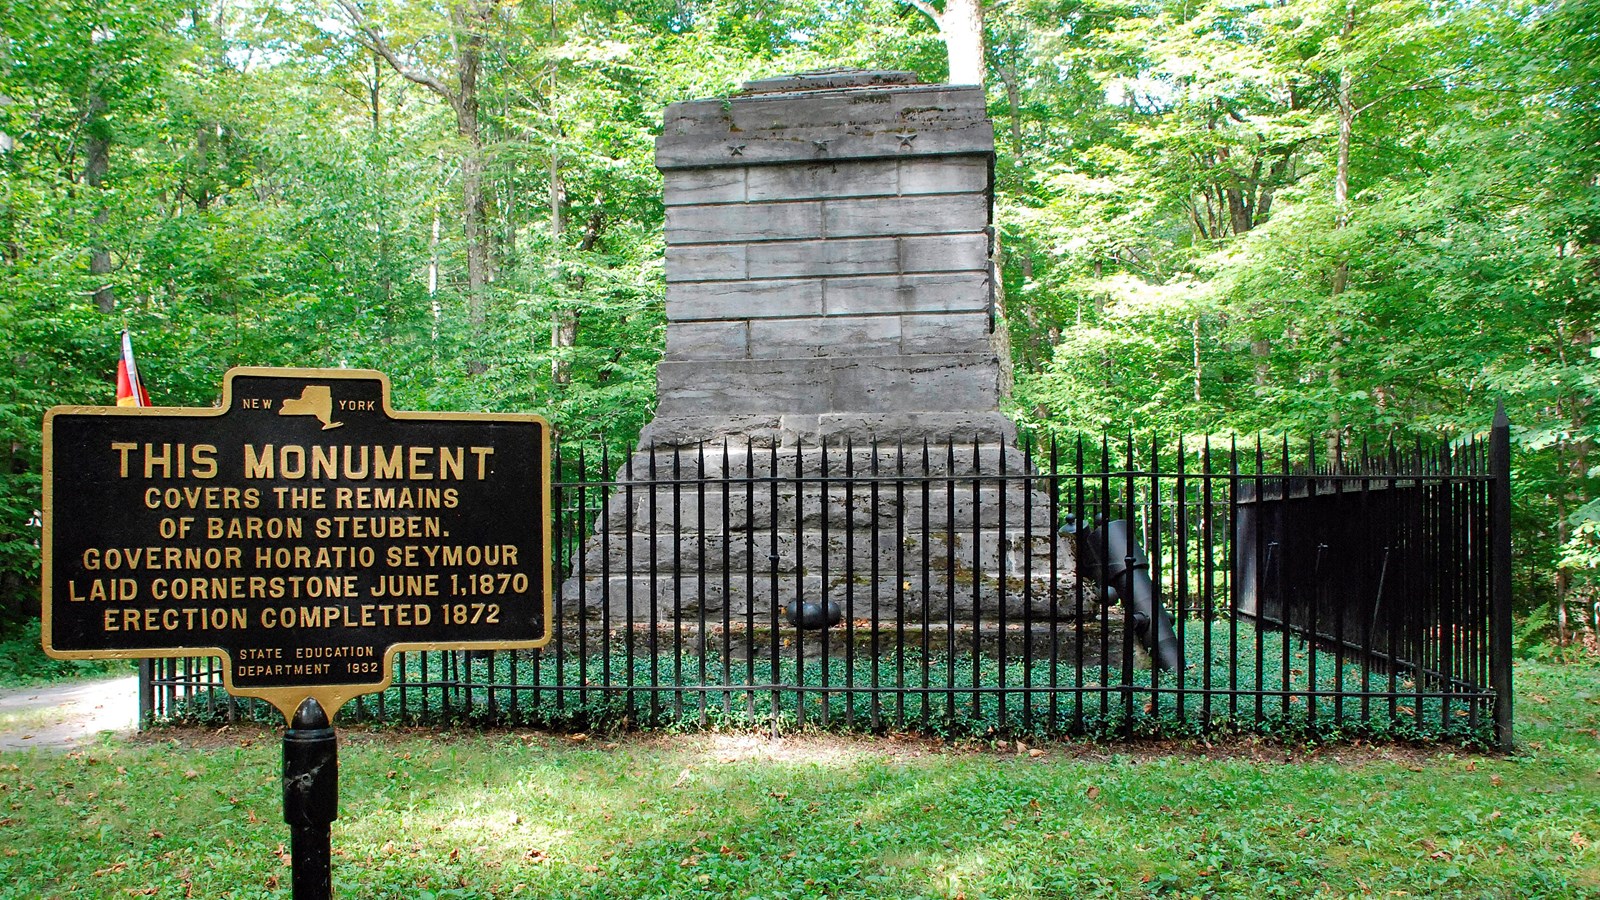 A large block, stone monument behind a rod iron fence.